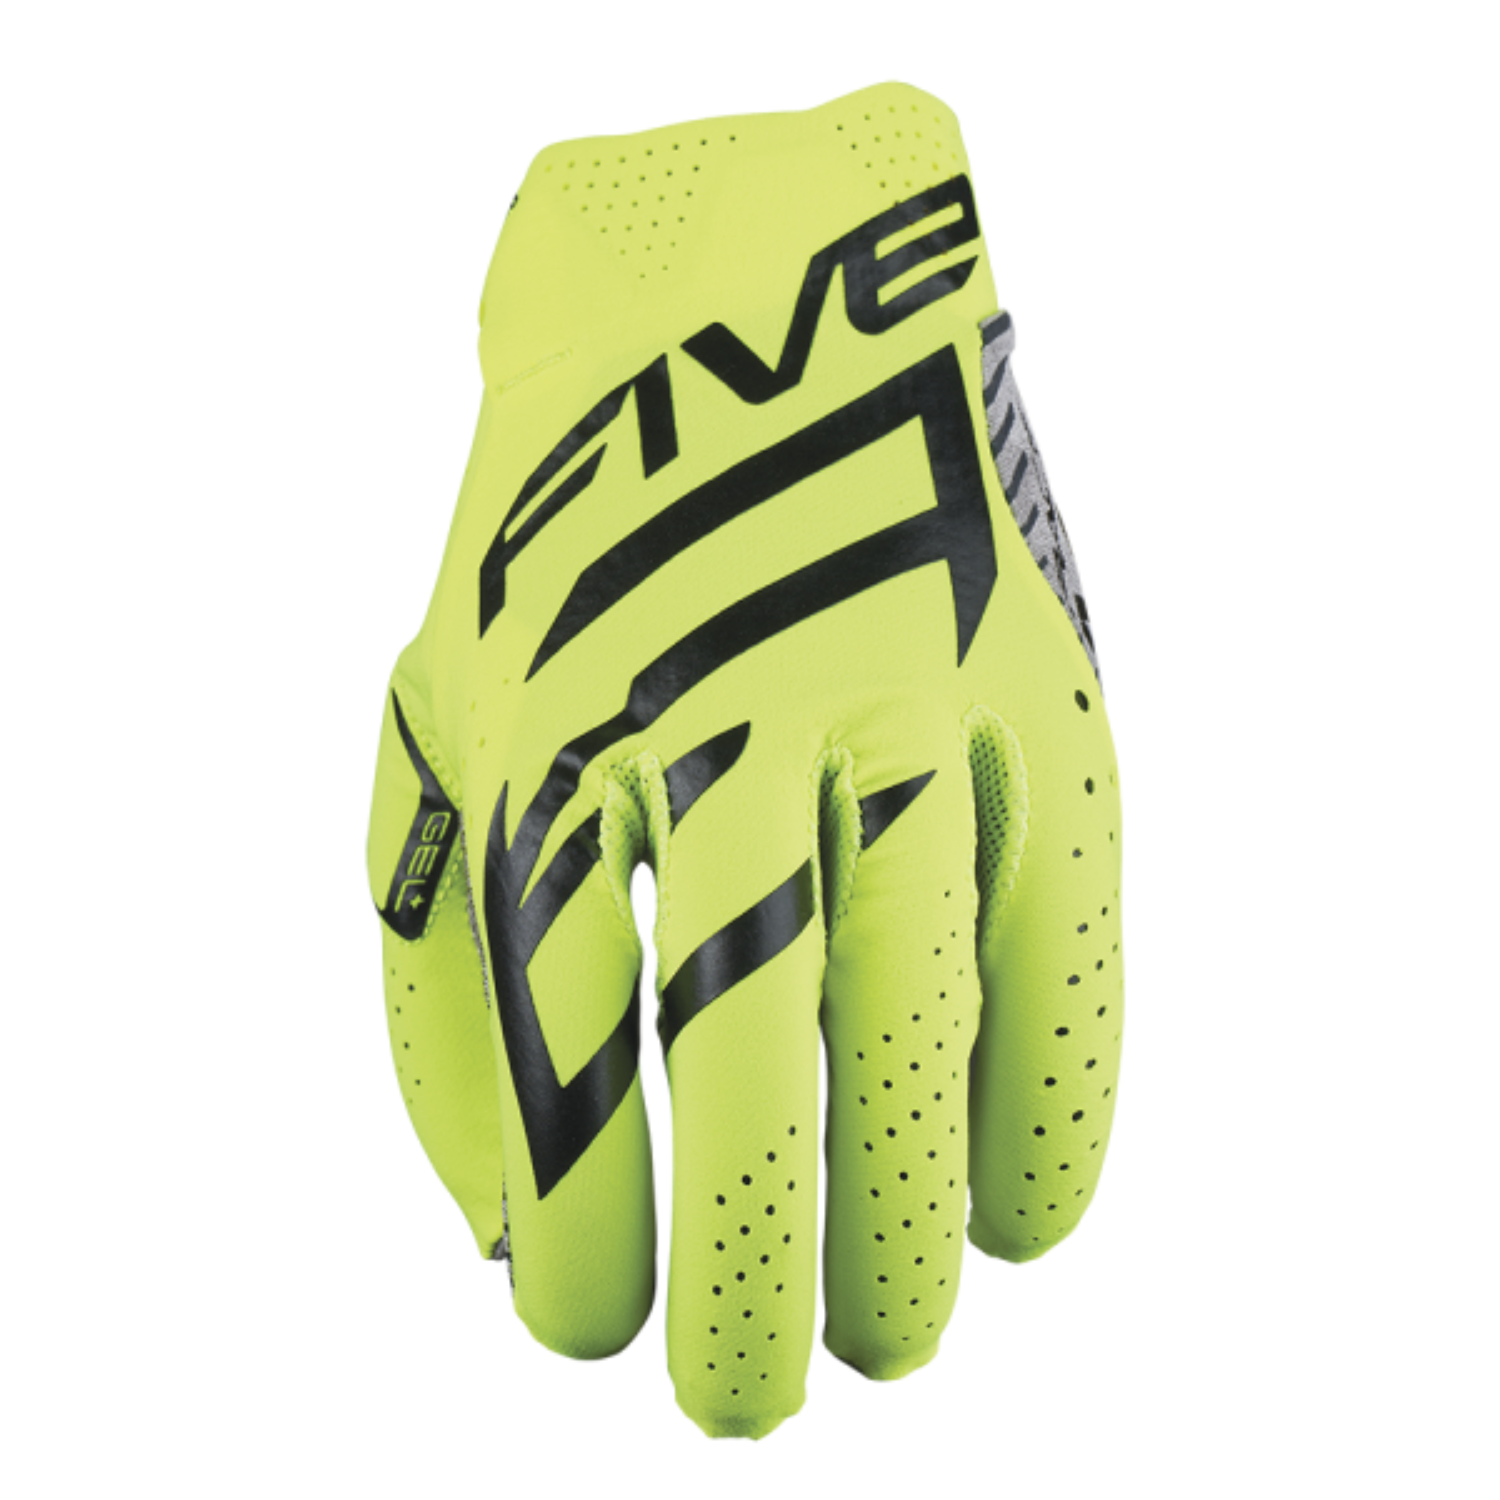 Image of Five MXF Race Gloves Fluorescent Yellow Size L ID 3841300111709